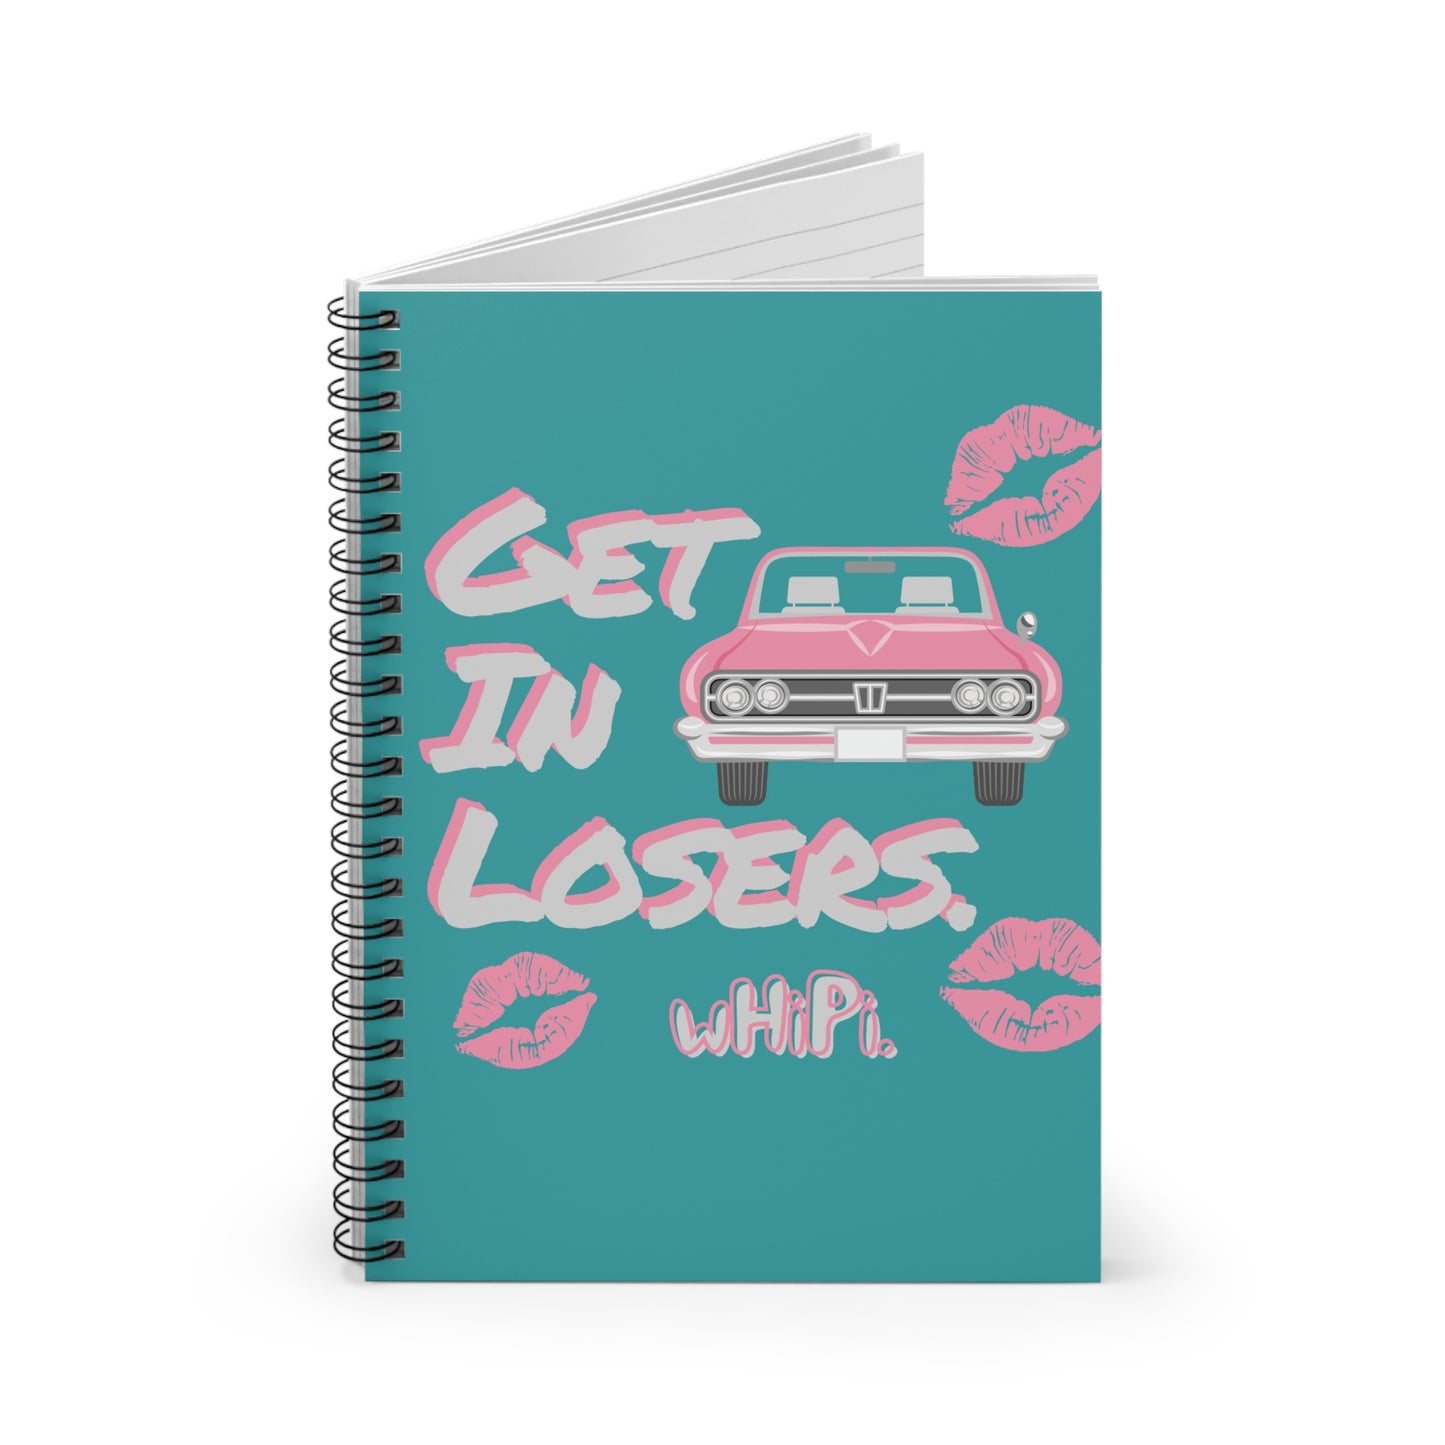 "Get in, Losers" Spiral Notebook